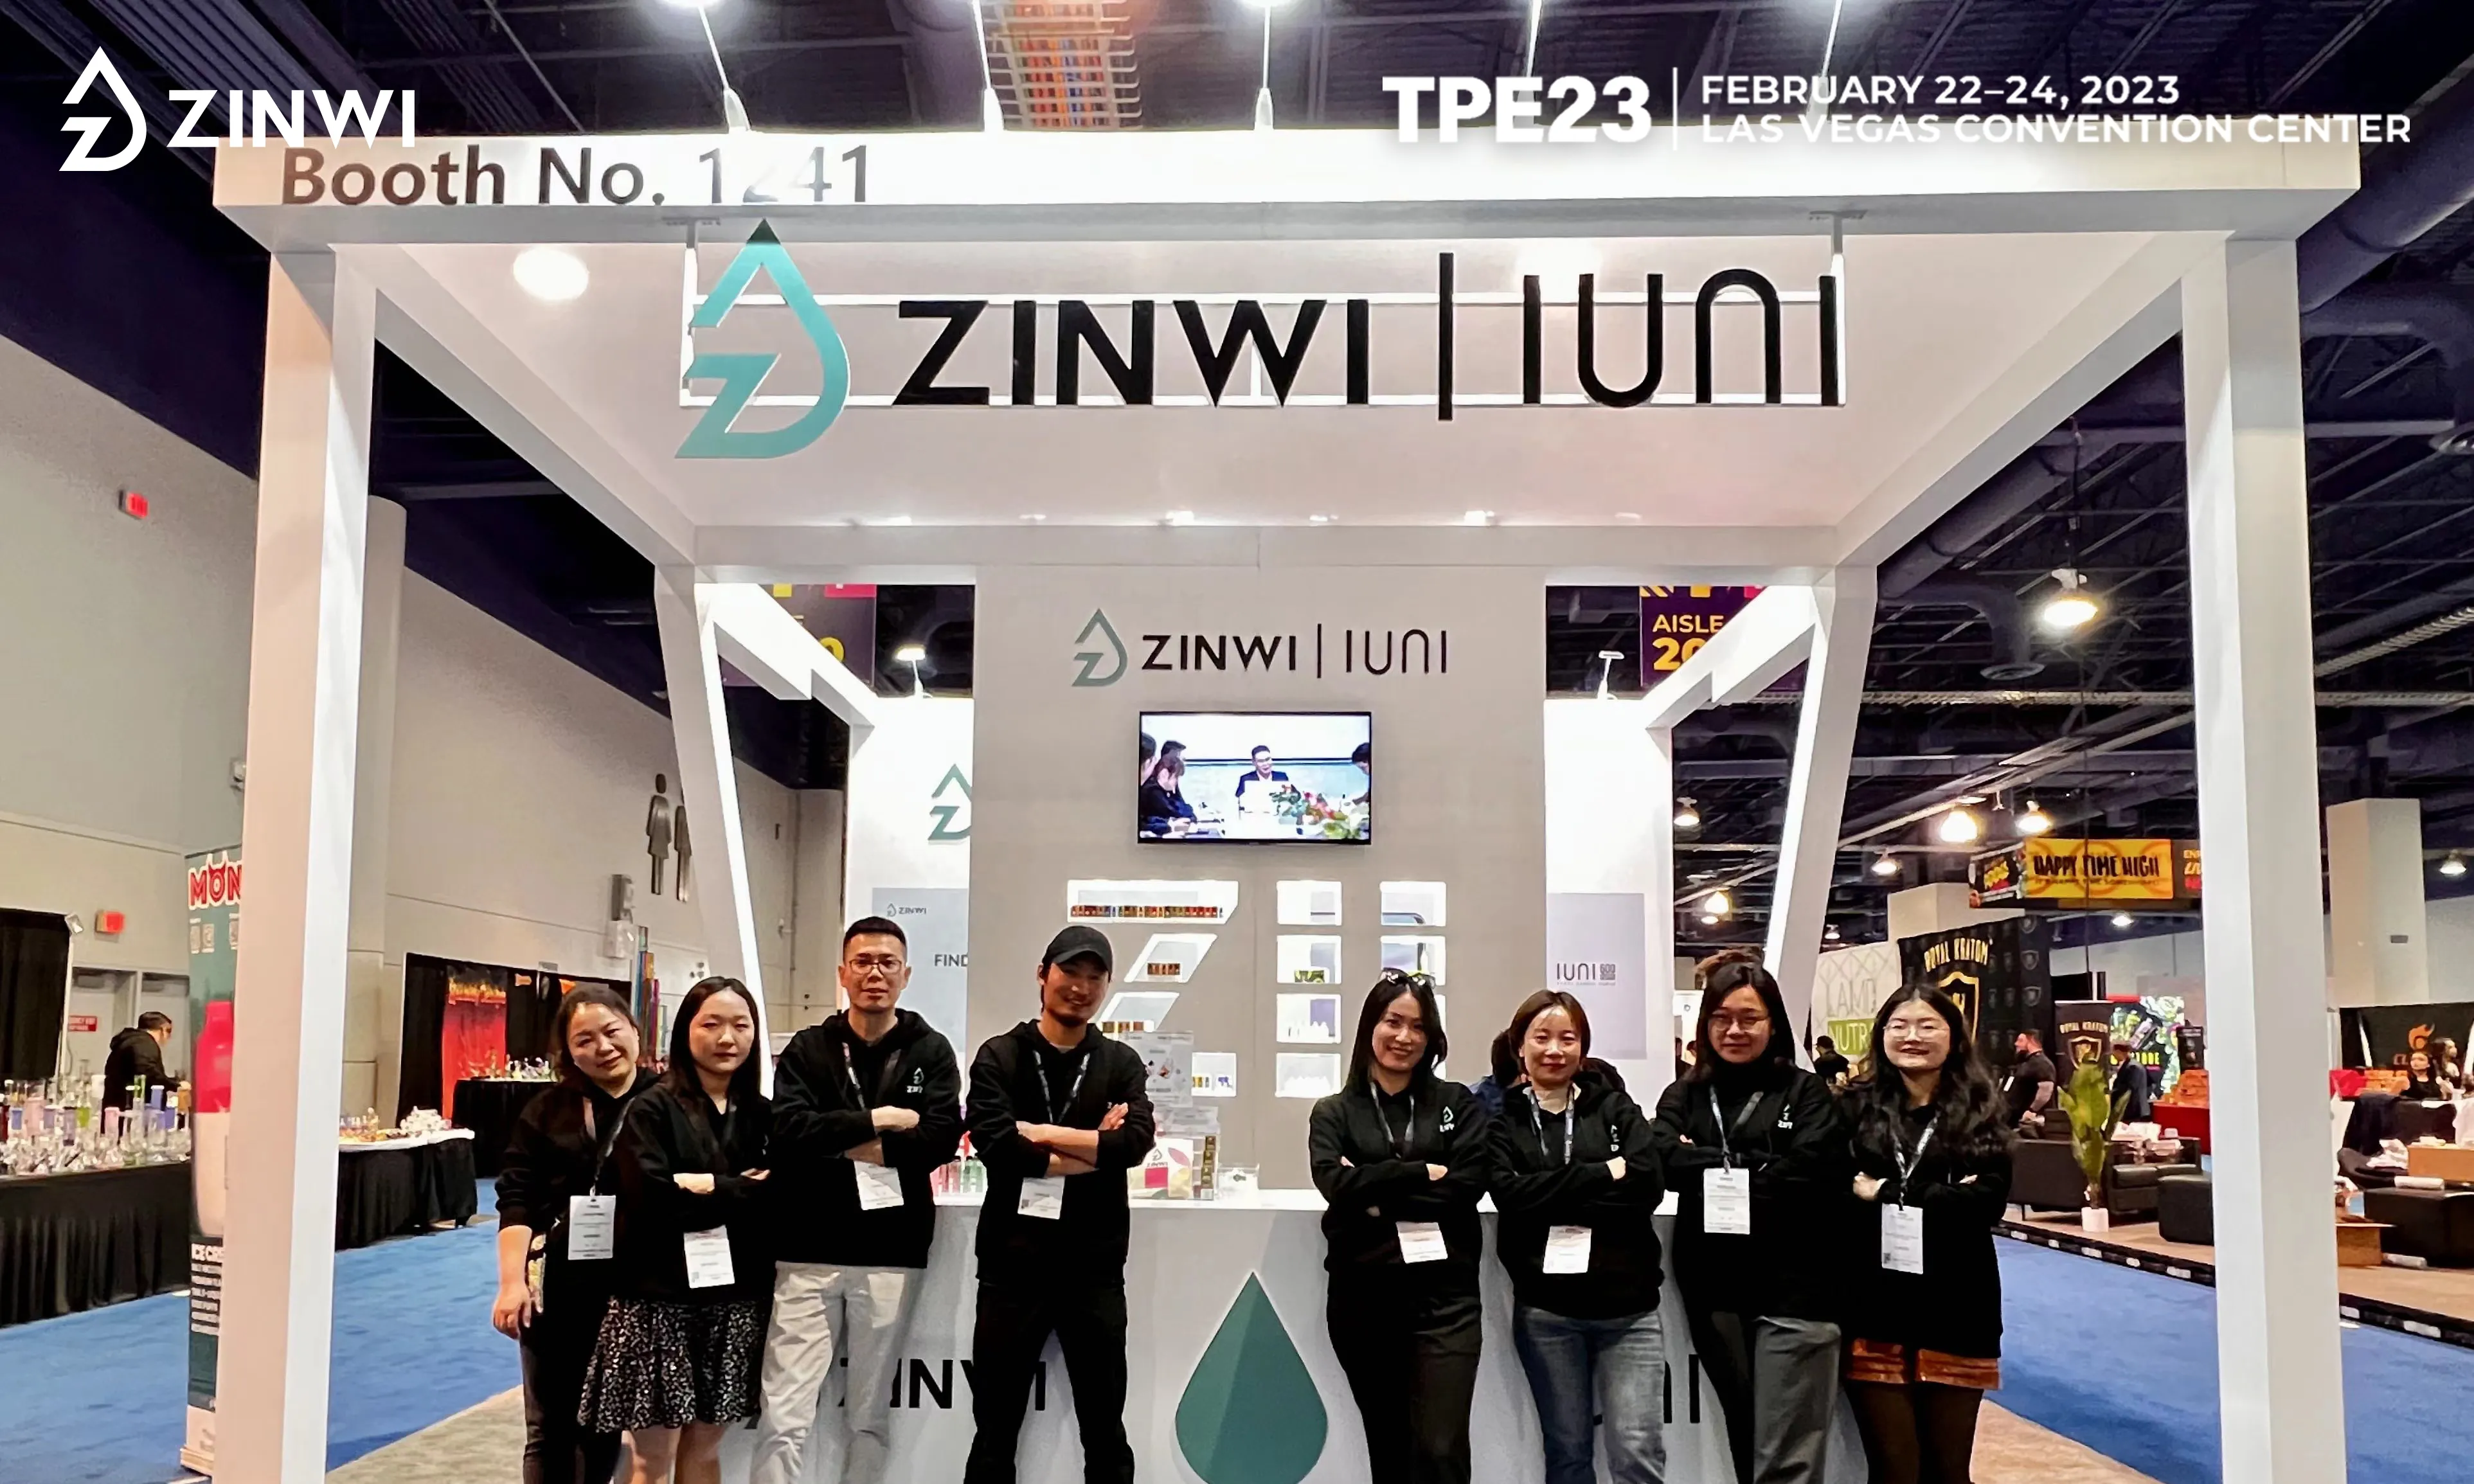 Zinwi will continue to communicate and discuss with more practitioners at the TPE23 site, witnessing the power of technology and innovation together.